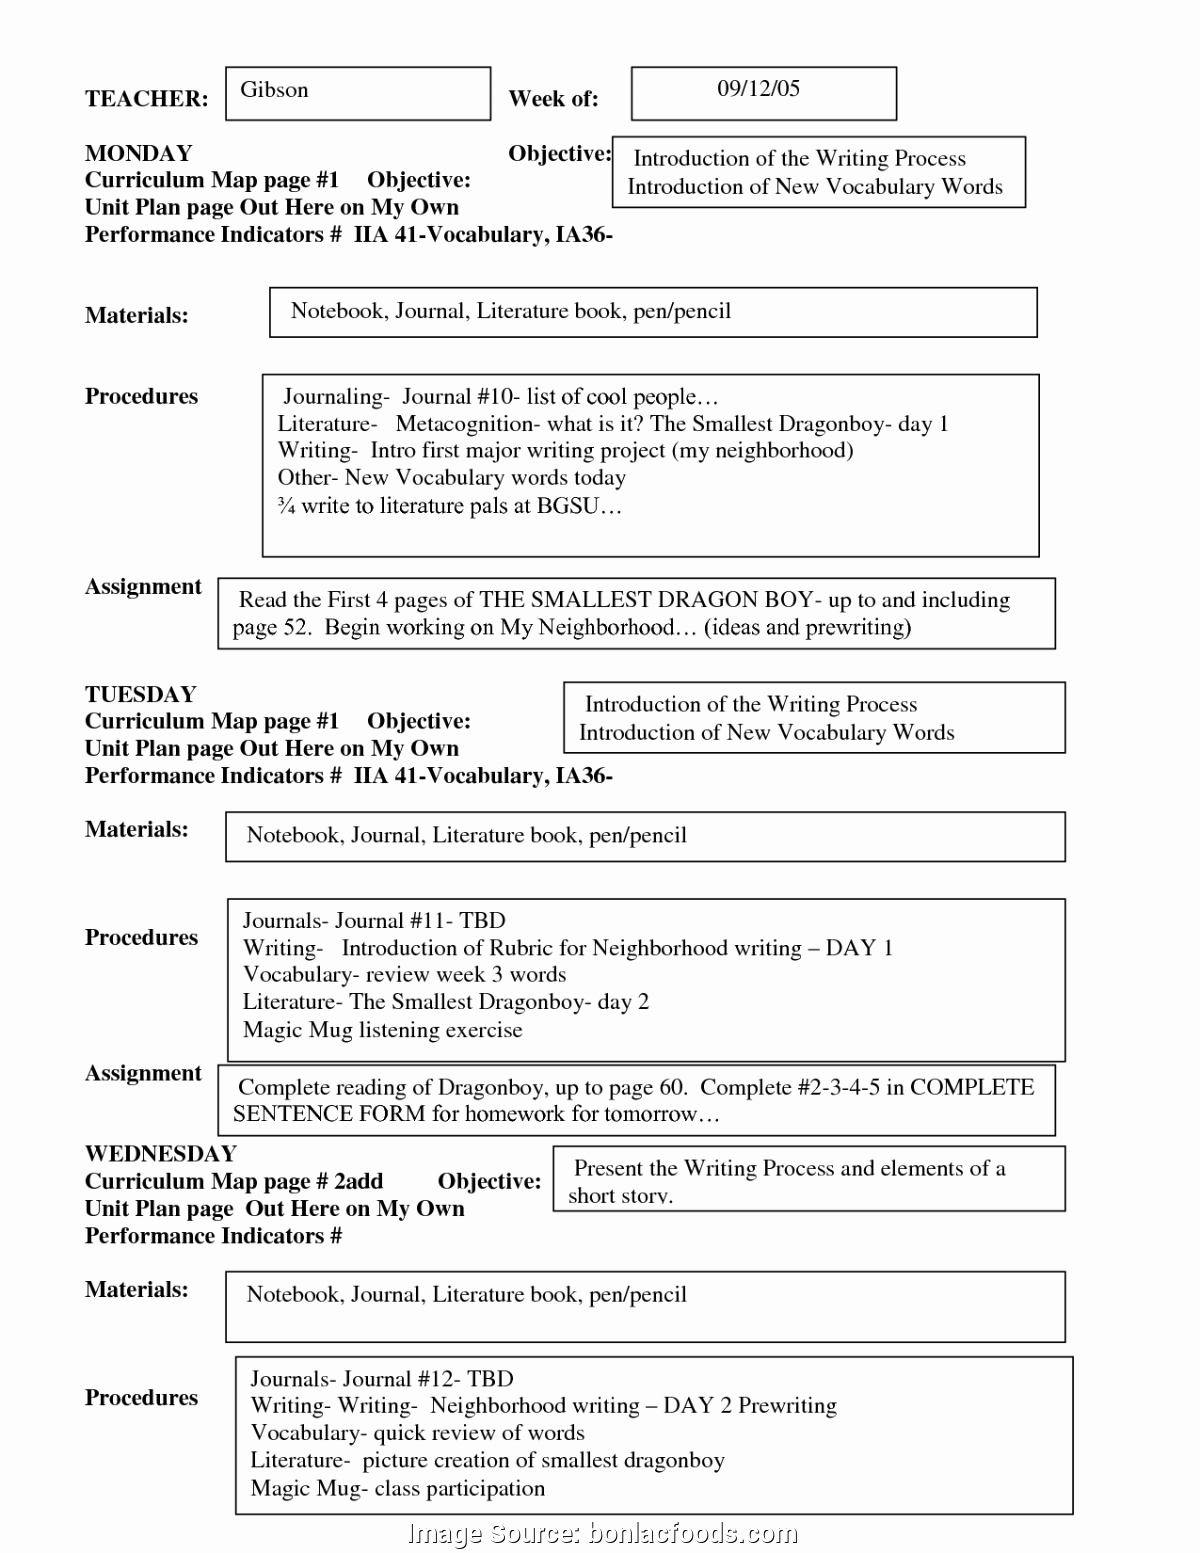 Scientific Method Worksheet Middle School Luxury Fresh Lessons Learned Project Management Examples 23